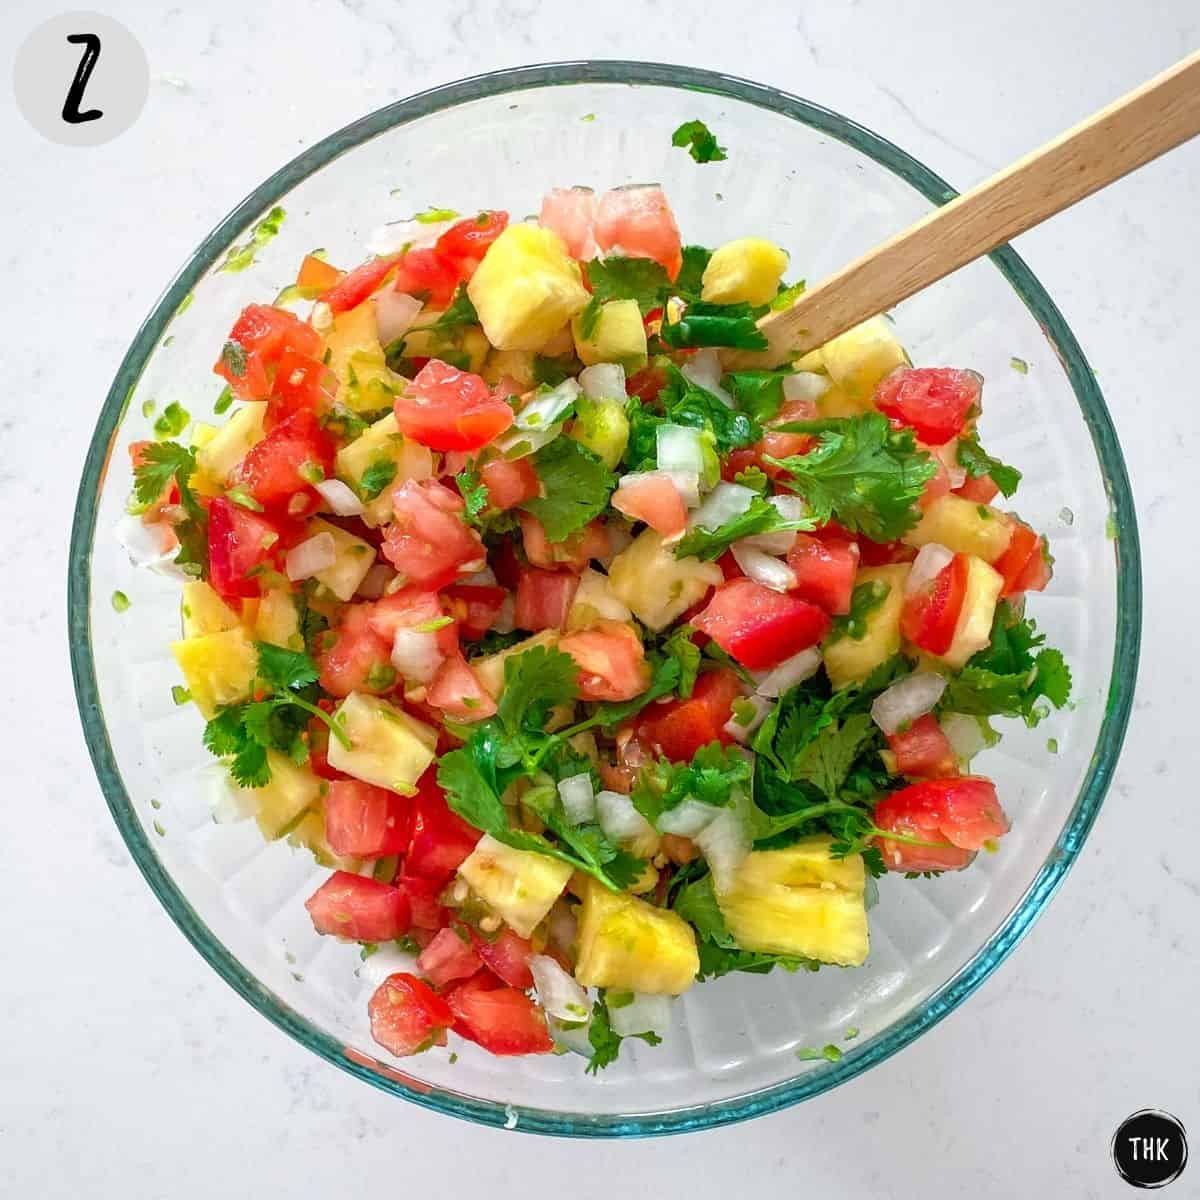 Glass mixing bowl filled with diced pineapple, tomato, jalapeno, cilantro and white onion.